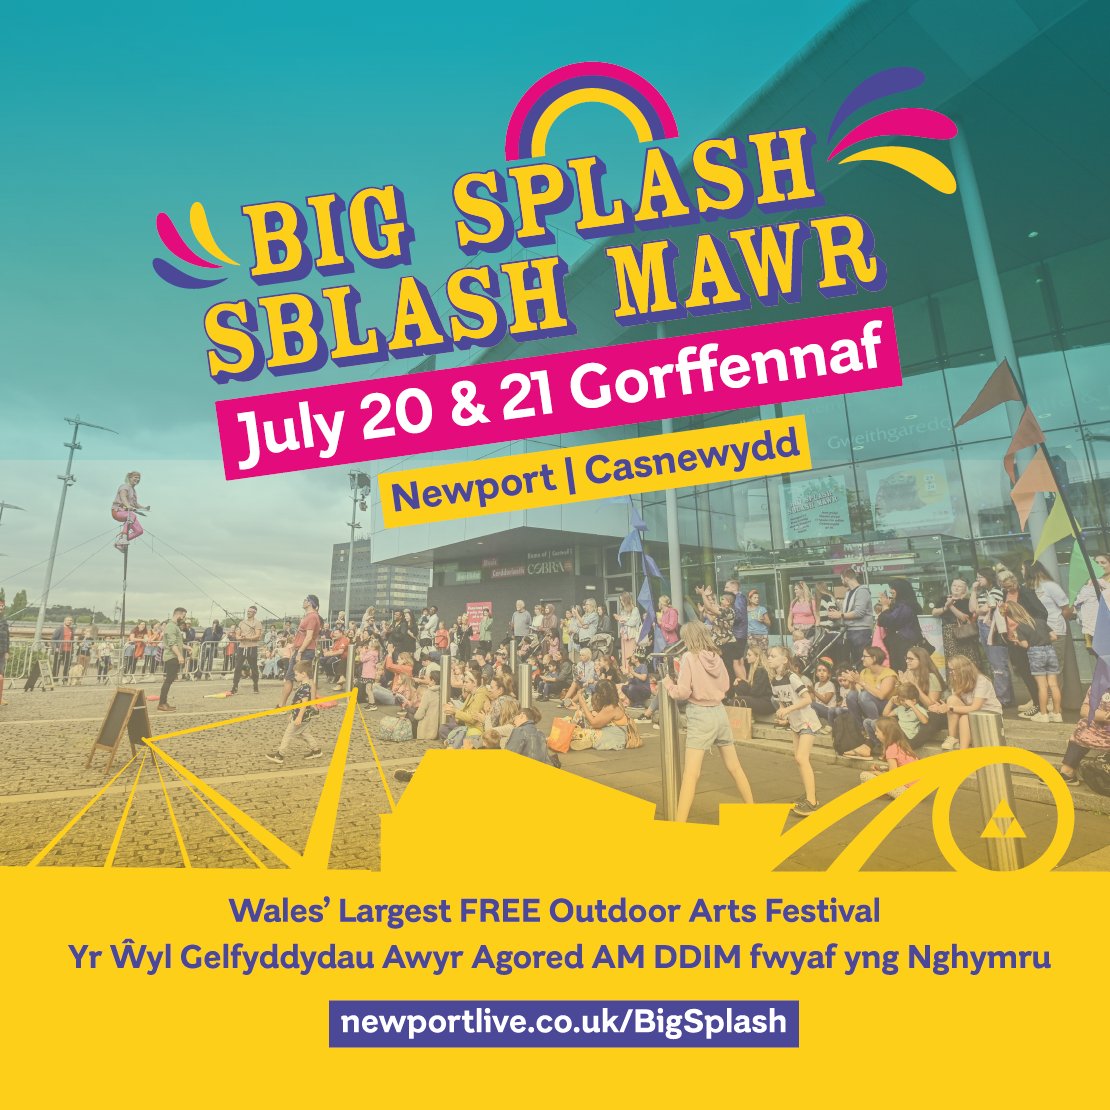 🎪Wales' largest FREE outdoor arts festival returns this July!🌞 Described as “a slice of Covent Garden in Newport”, Big Splash is the perfect way to kickstart the Summer, with live music, street theatre, workshops, crafts, and more. Take a look here: newportlive.co.uk/bigsplash